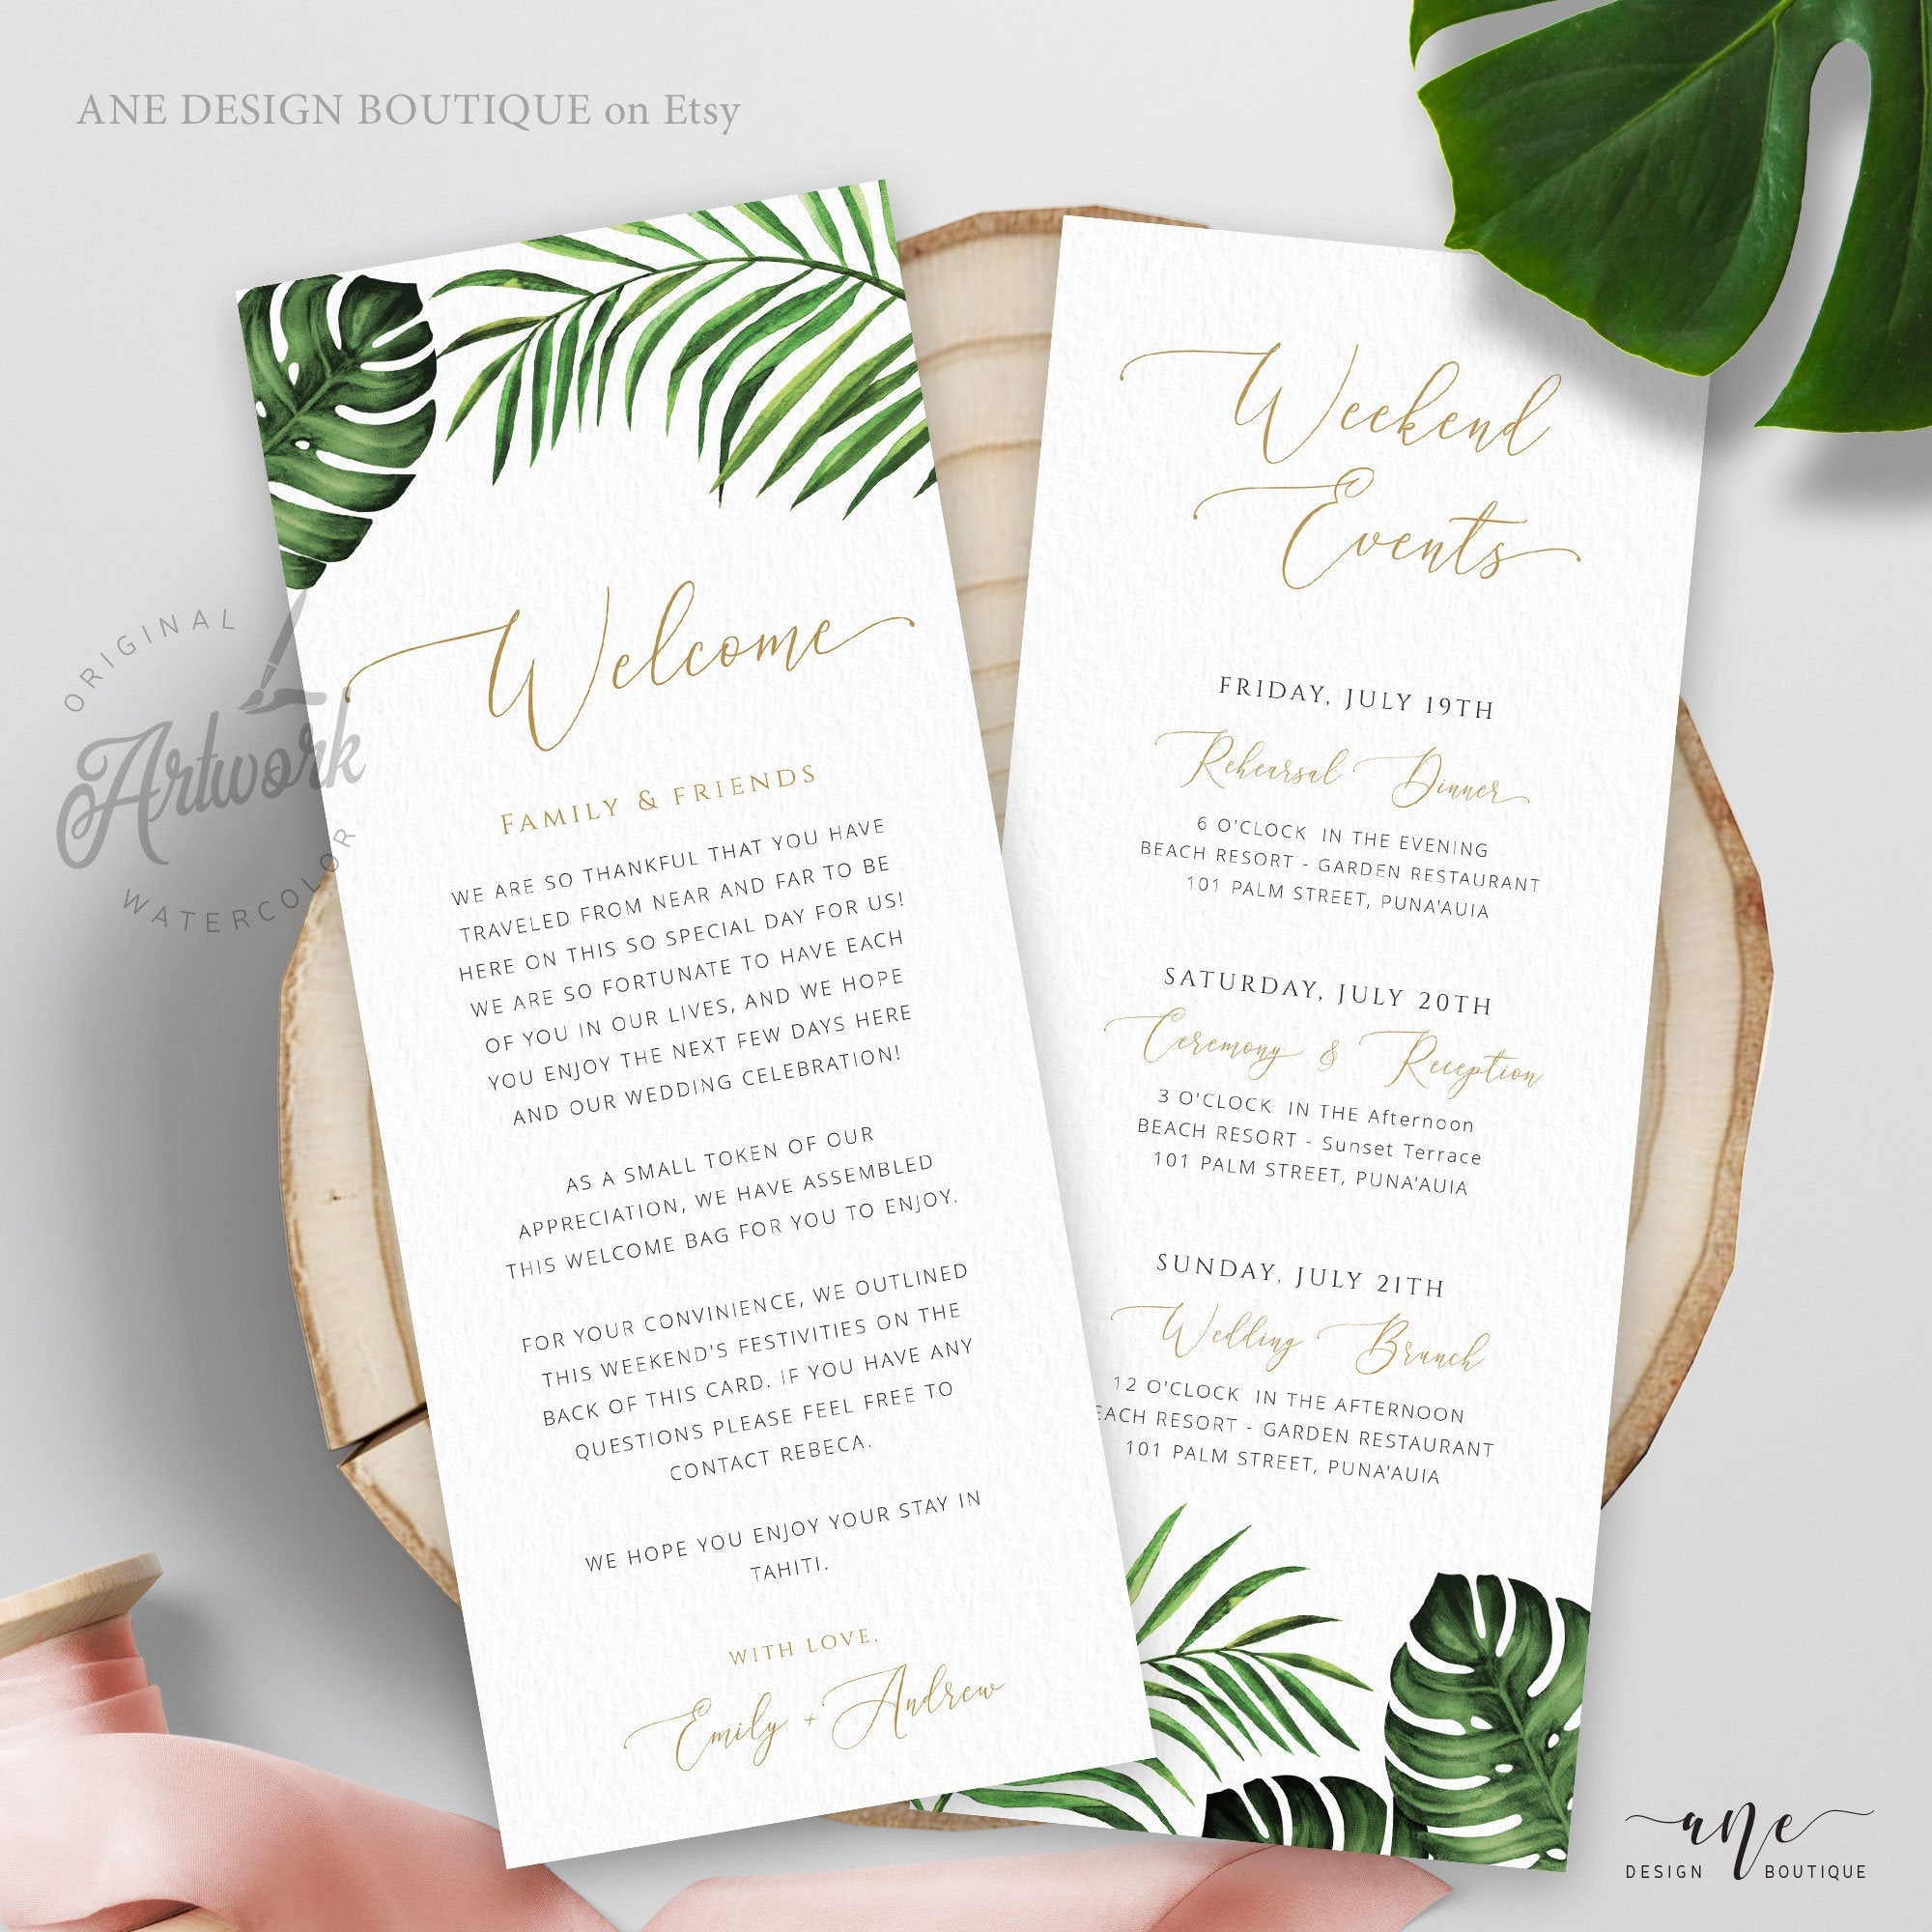 wedding welcome bag note